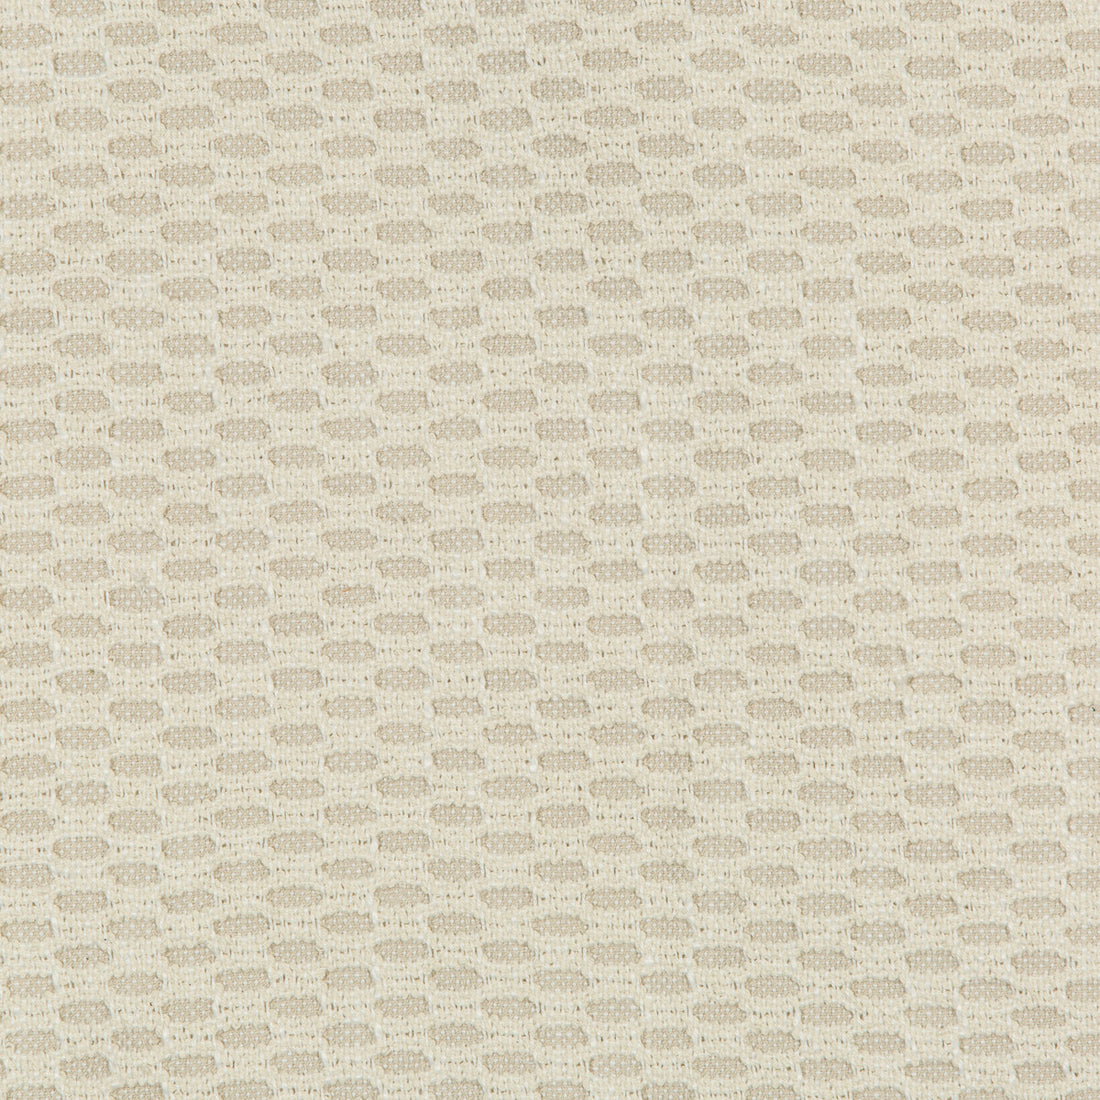 Kravet Design fabric in 36078-161 color - pattern 36078.161.0 - by Kravet Design in the Inside Out Performance Fabrics collection